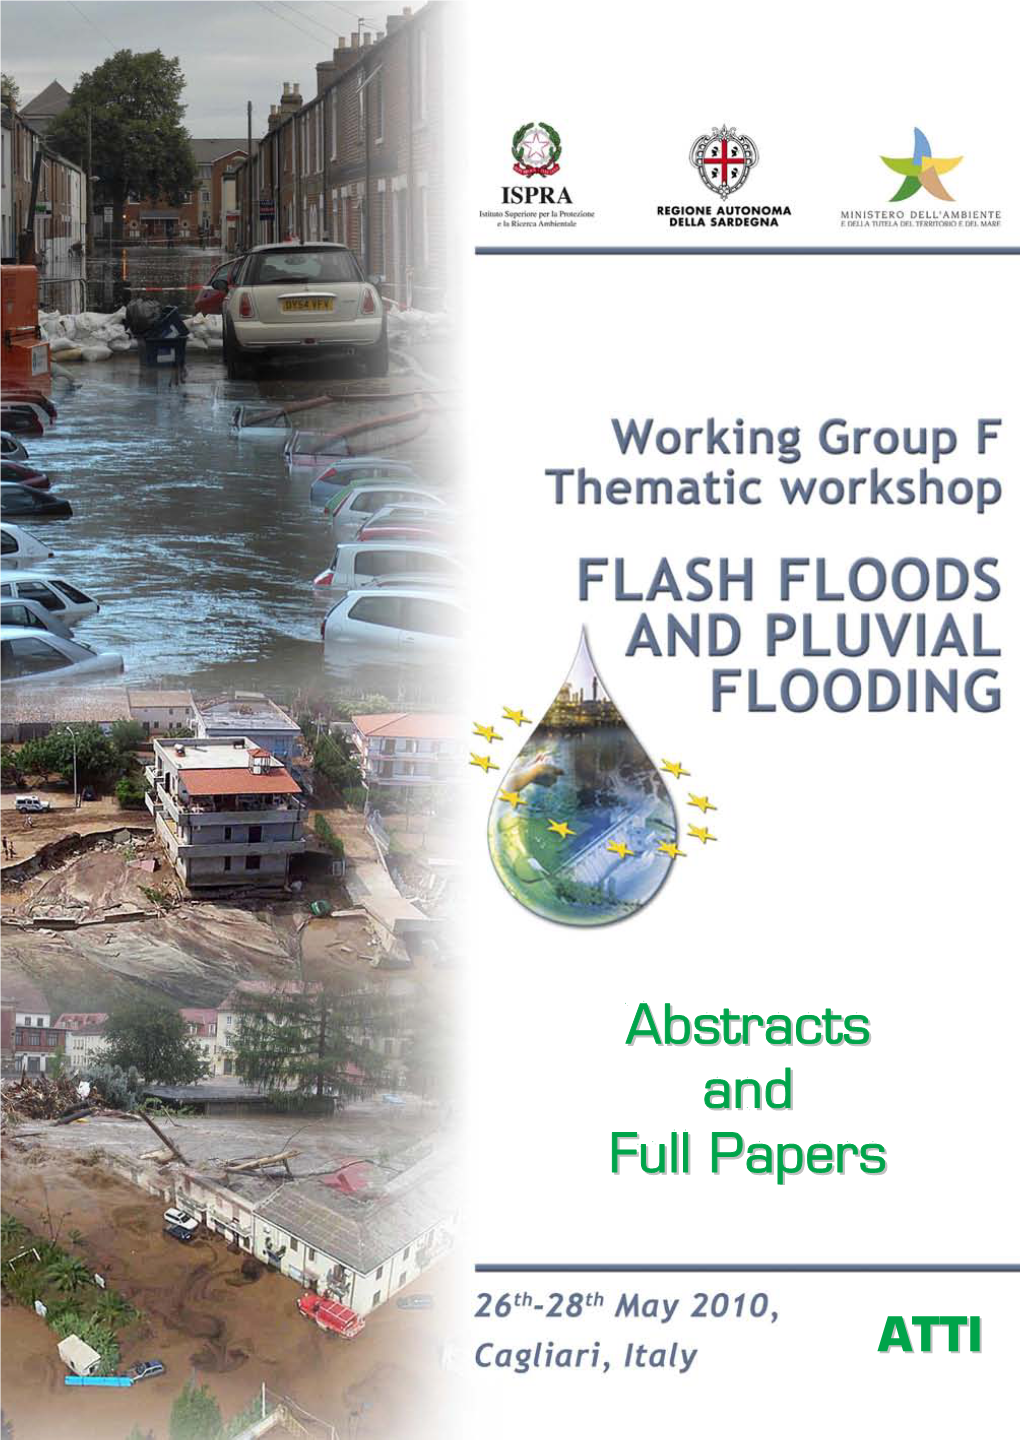 Working Group F Thematic Workshop on FLASH FLOODS and PLUVIAL FLOODING – Abstracts and Full Papers